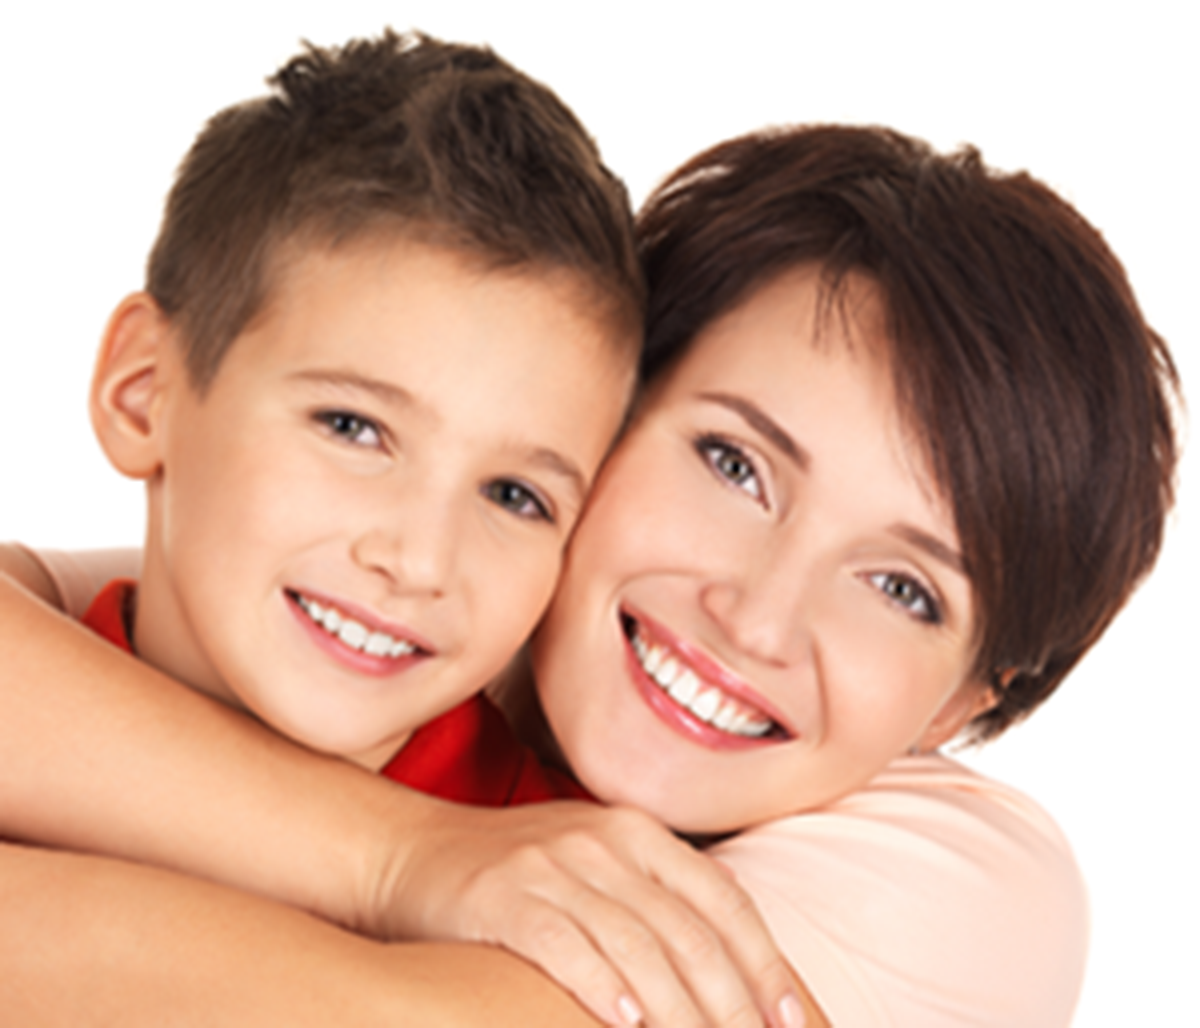 Preparing your child to receive dental services